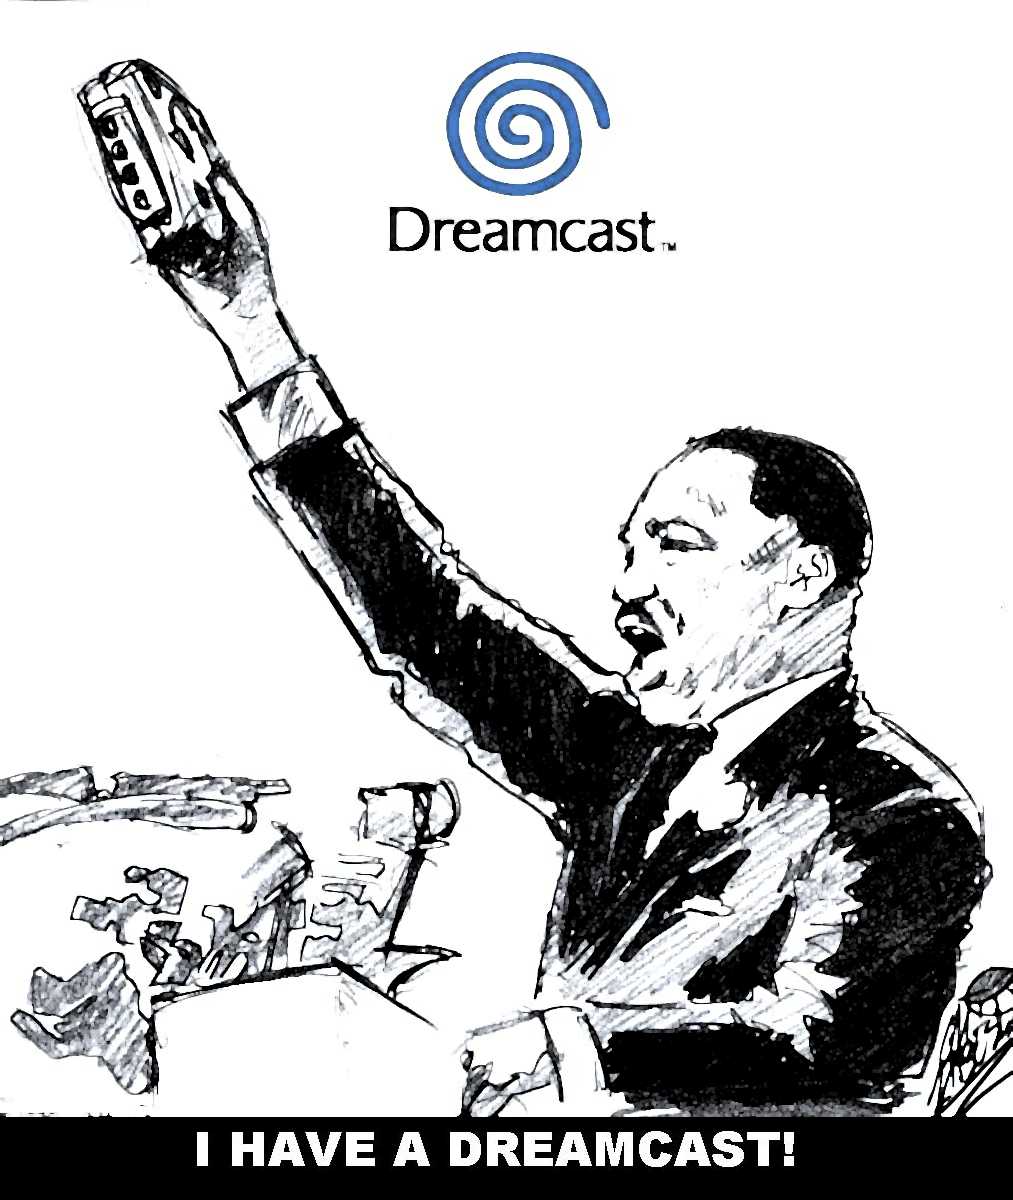 "I have a dream that my four little children will one day live in a nation where they will not be judged by the color of their skin but by the content of their Dreamcast skills."